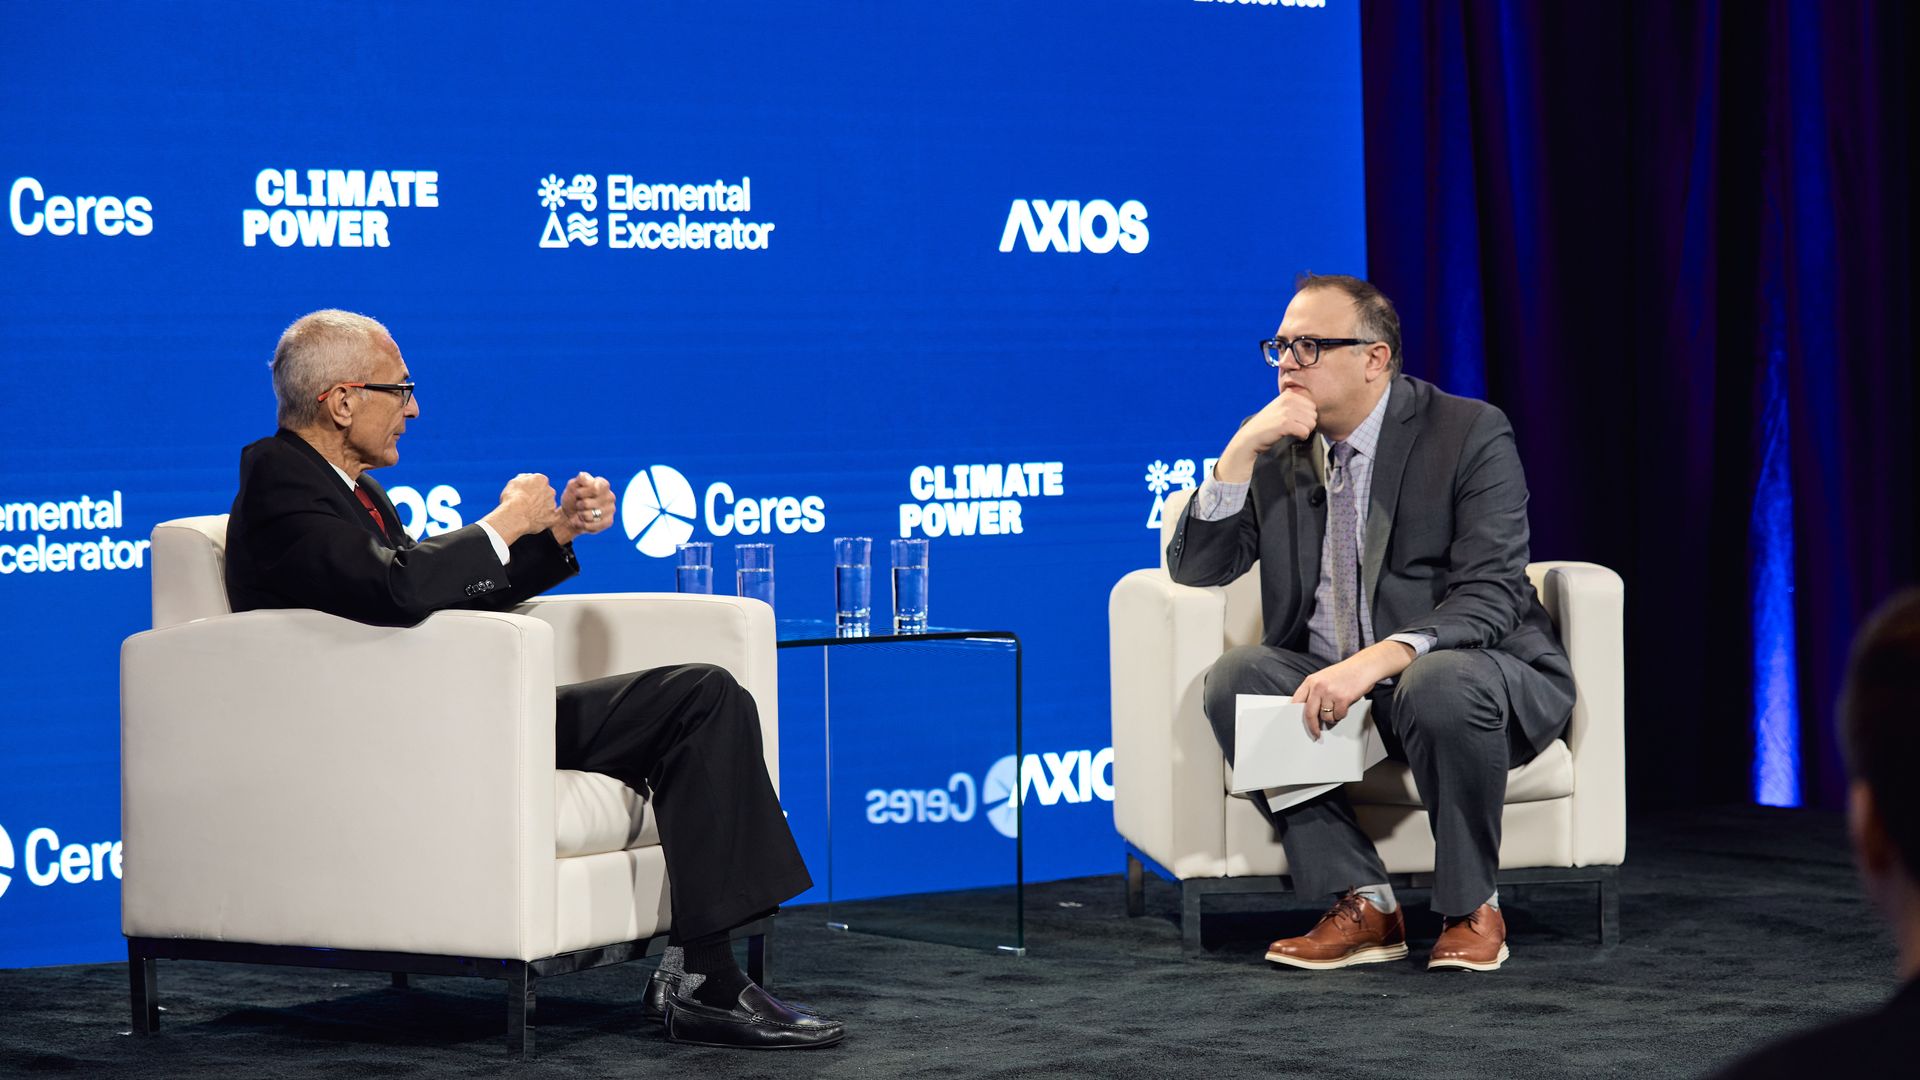 Senior presidential advisor for international climate policy John Podesta speaks during an Axios event on March 6. 